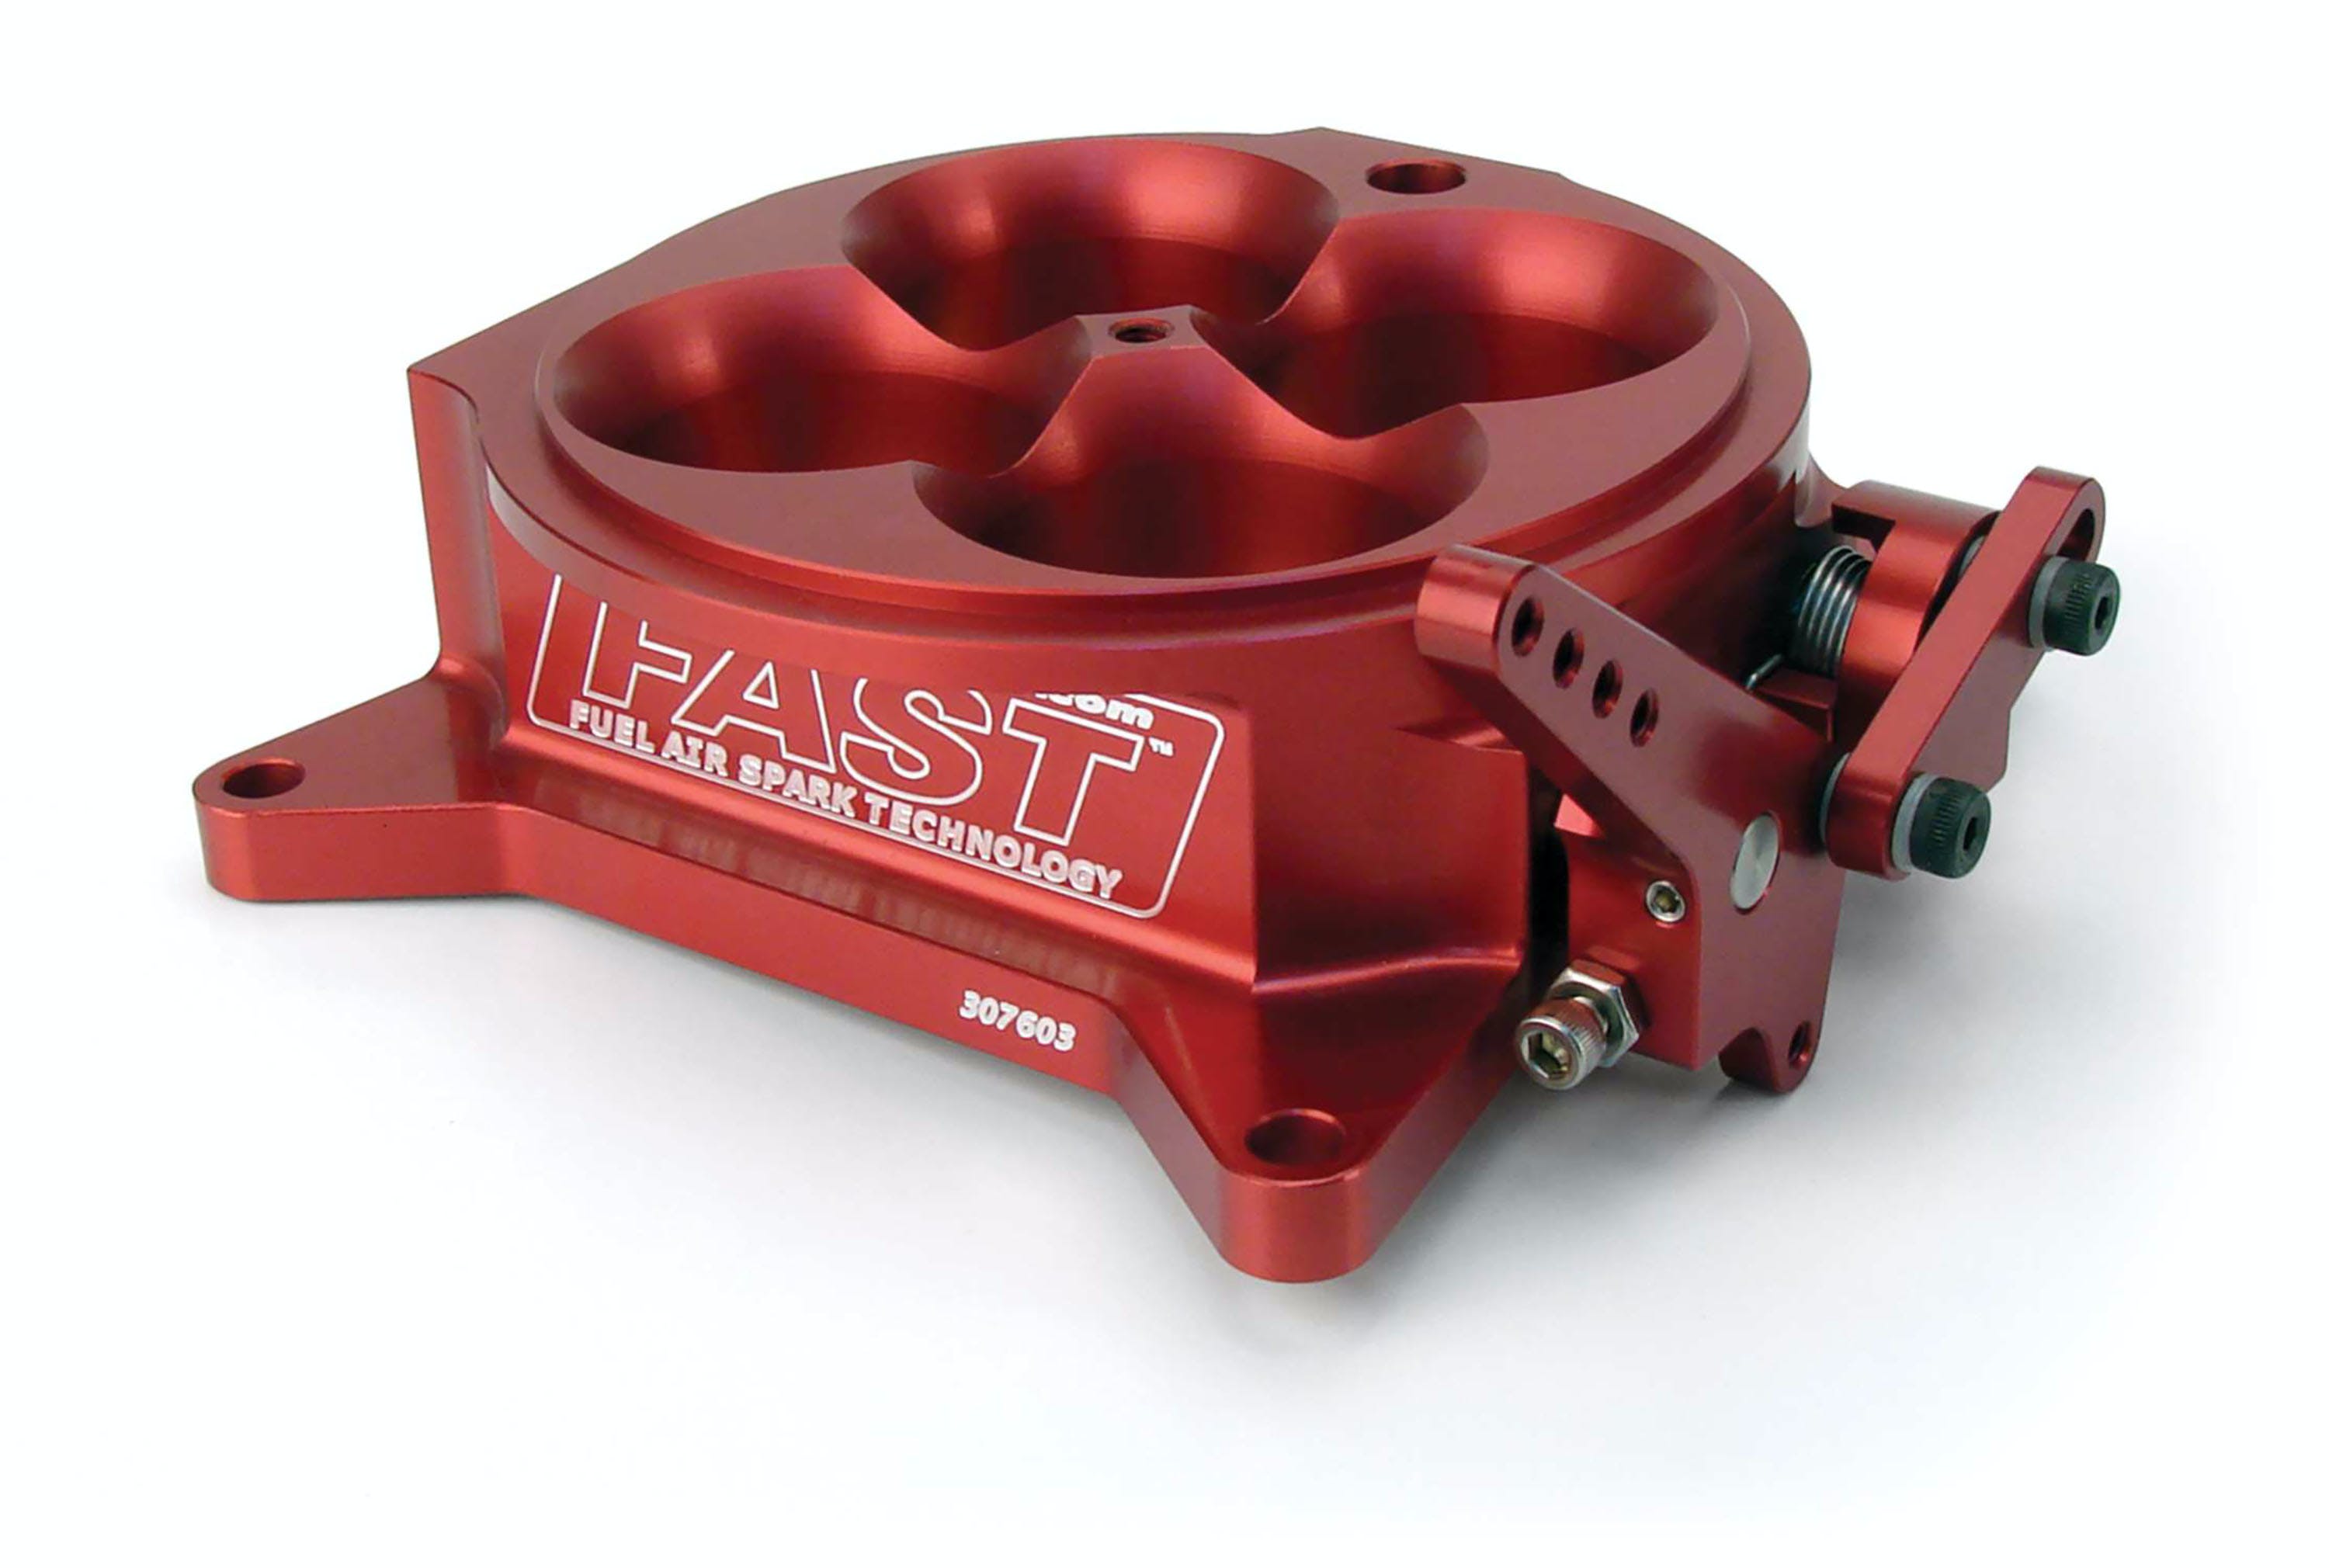 FAST - Fuel Air Spark Technology 307603 Red 4150 Flange Air Only Throttle Body for Multiport Injection EFI Systems